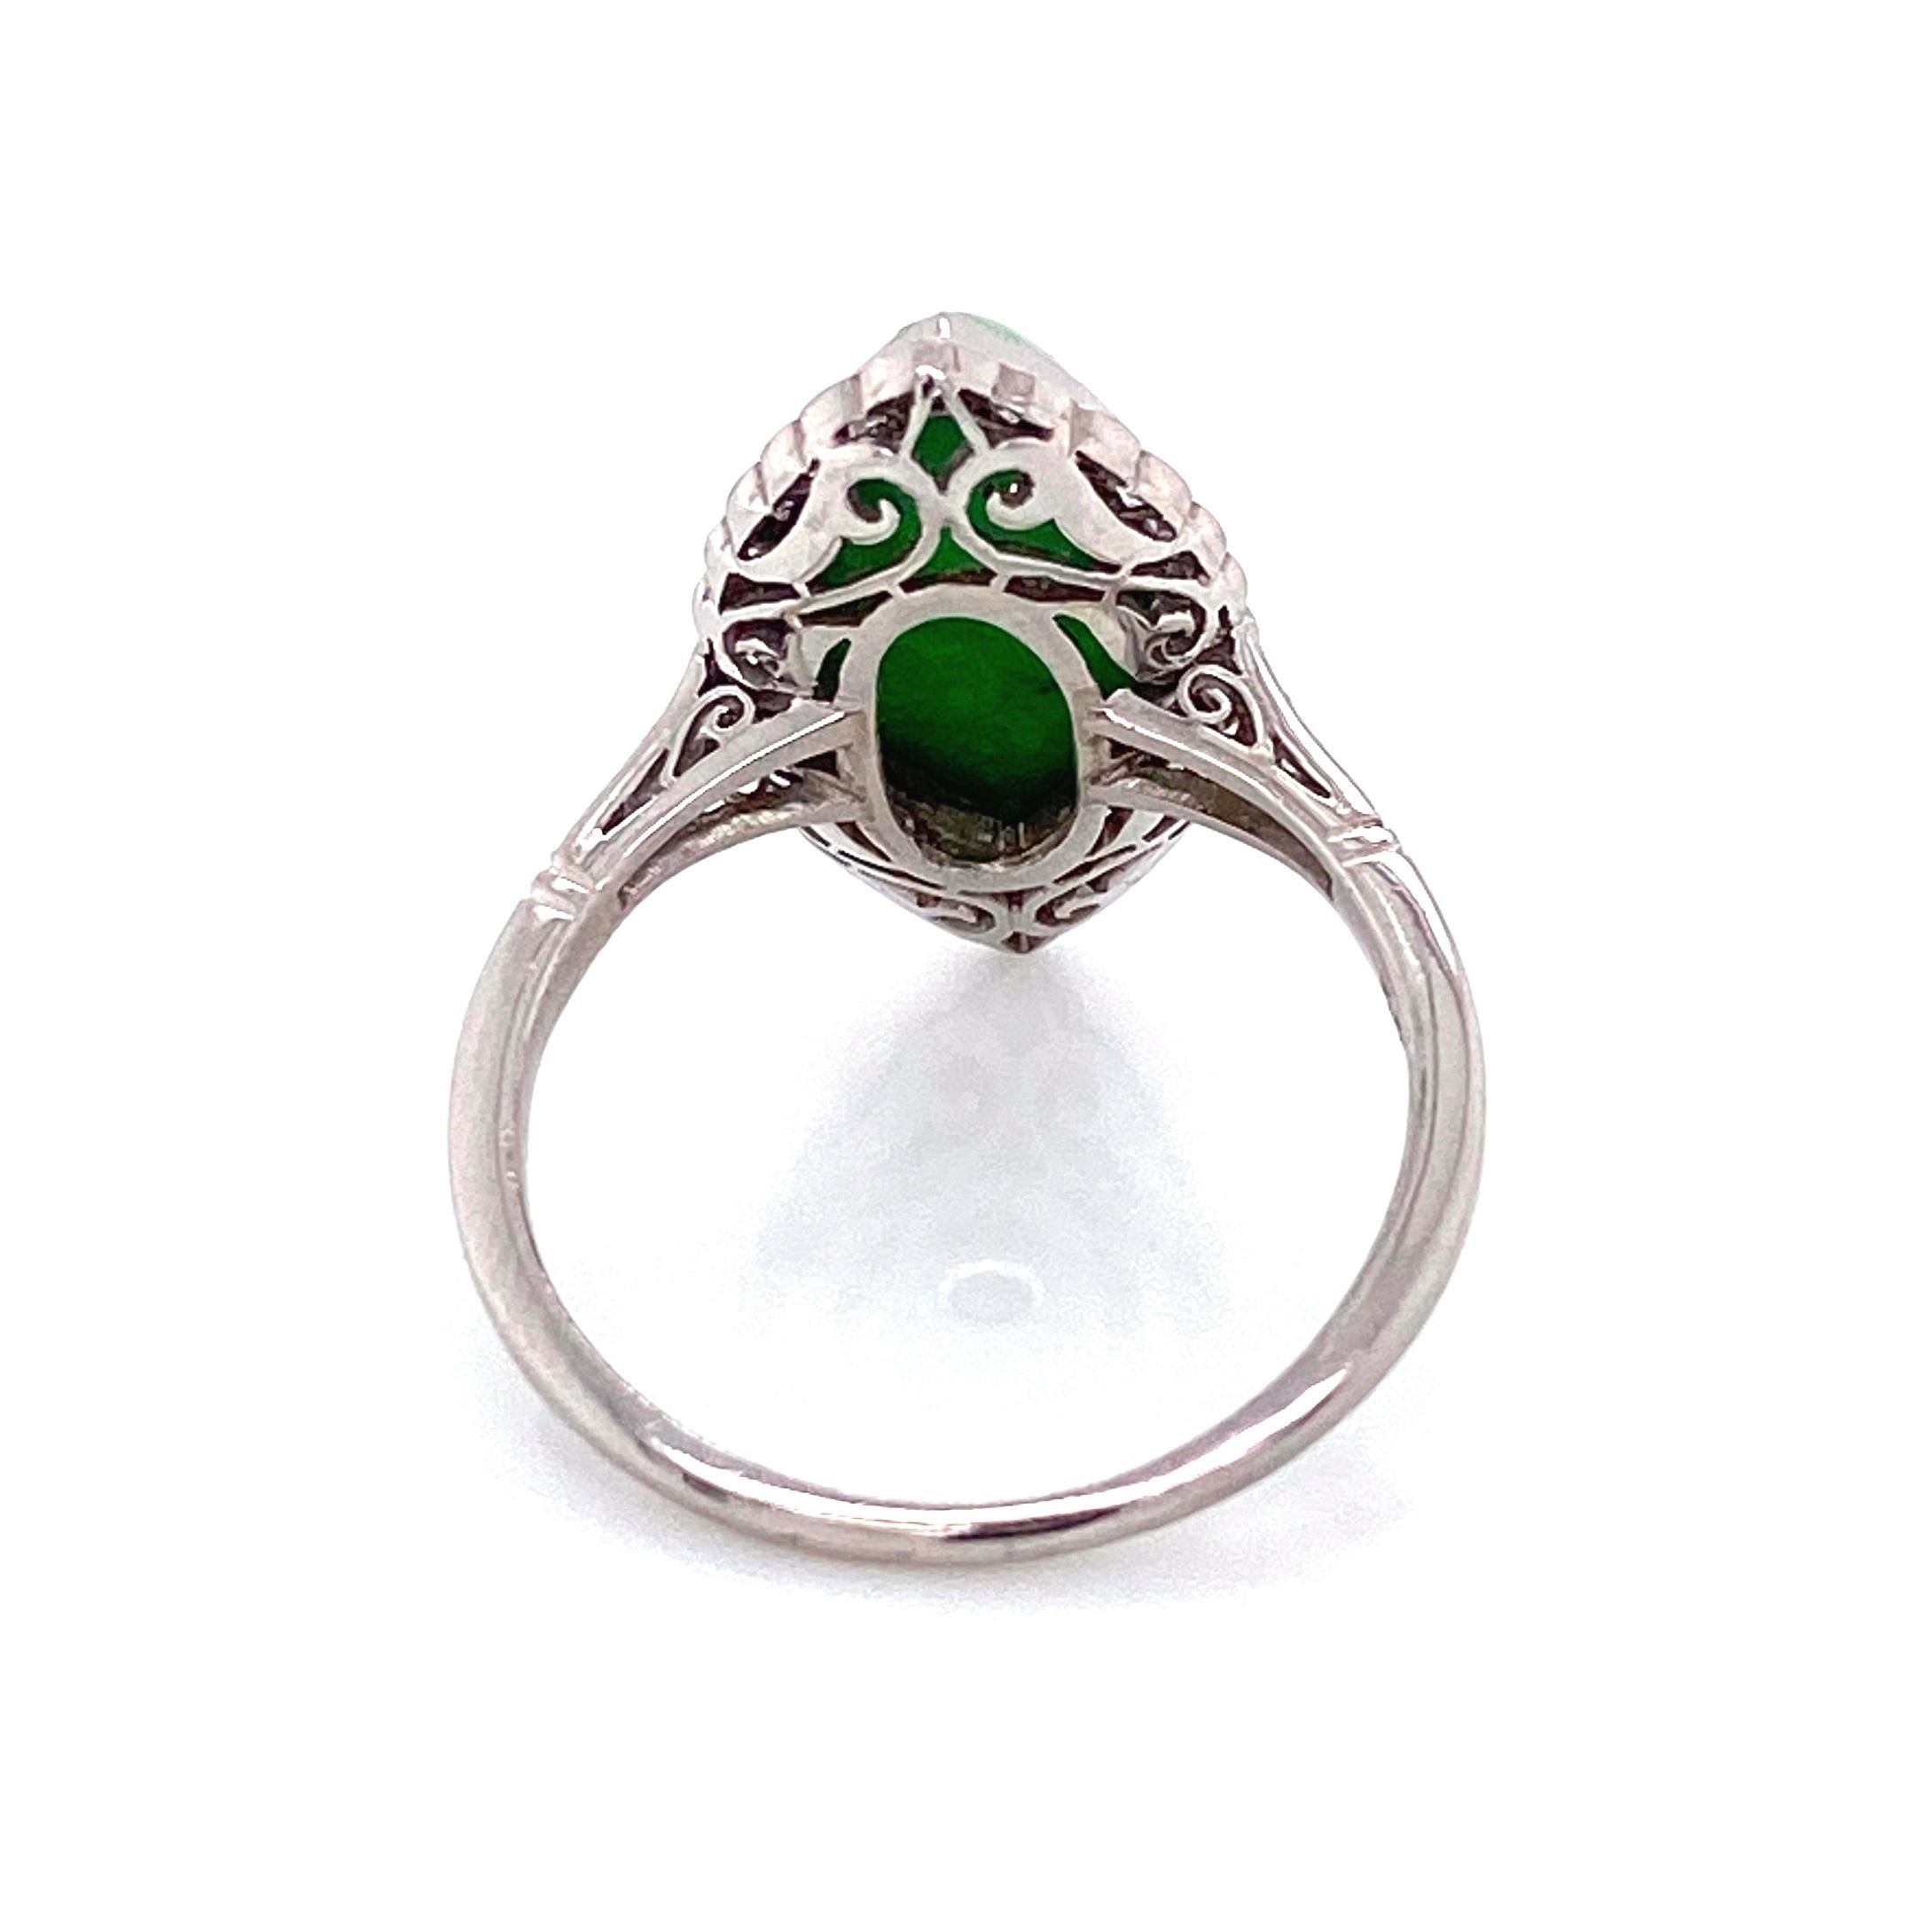 Mixed Cut 4 Carat Navette Green Turquoise and Diamond Platinum Ring Estate Fine Jewelry